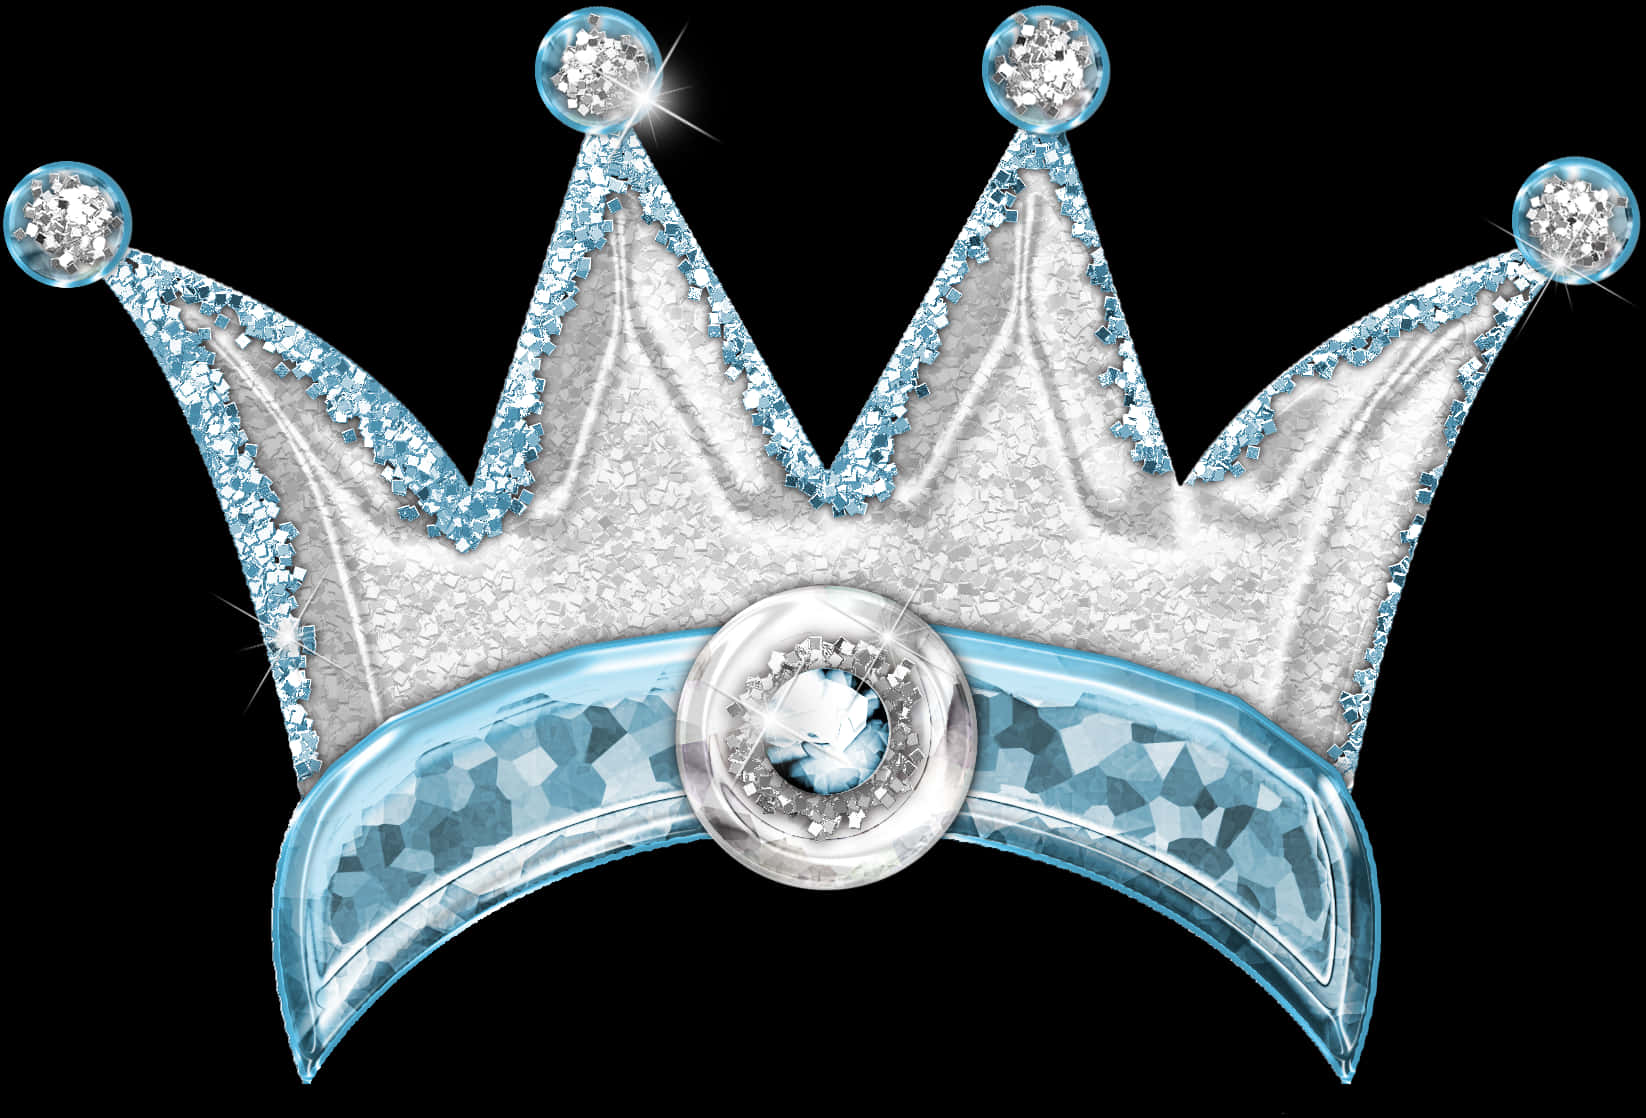 A Silver And Blue Crown With Diamonds